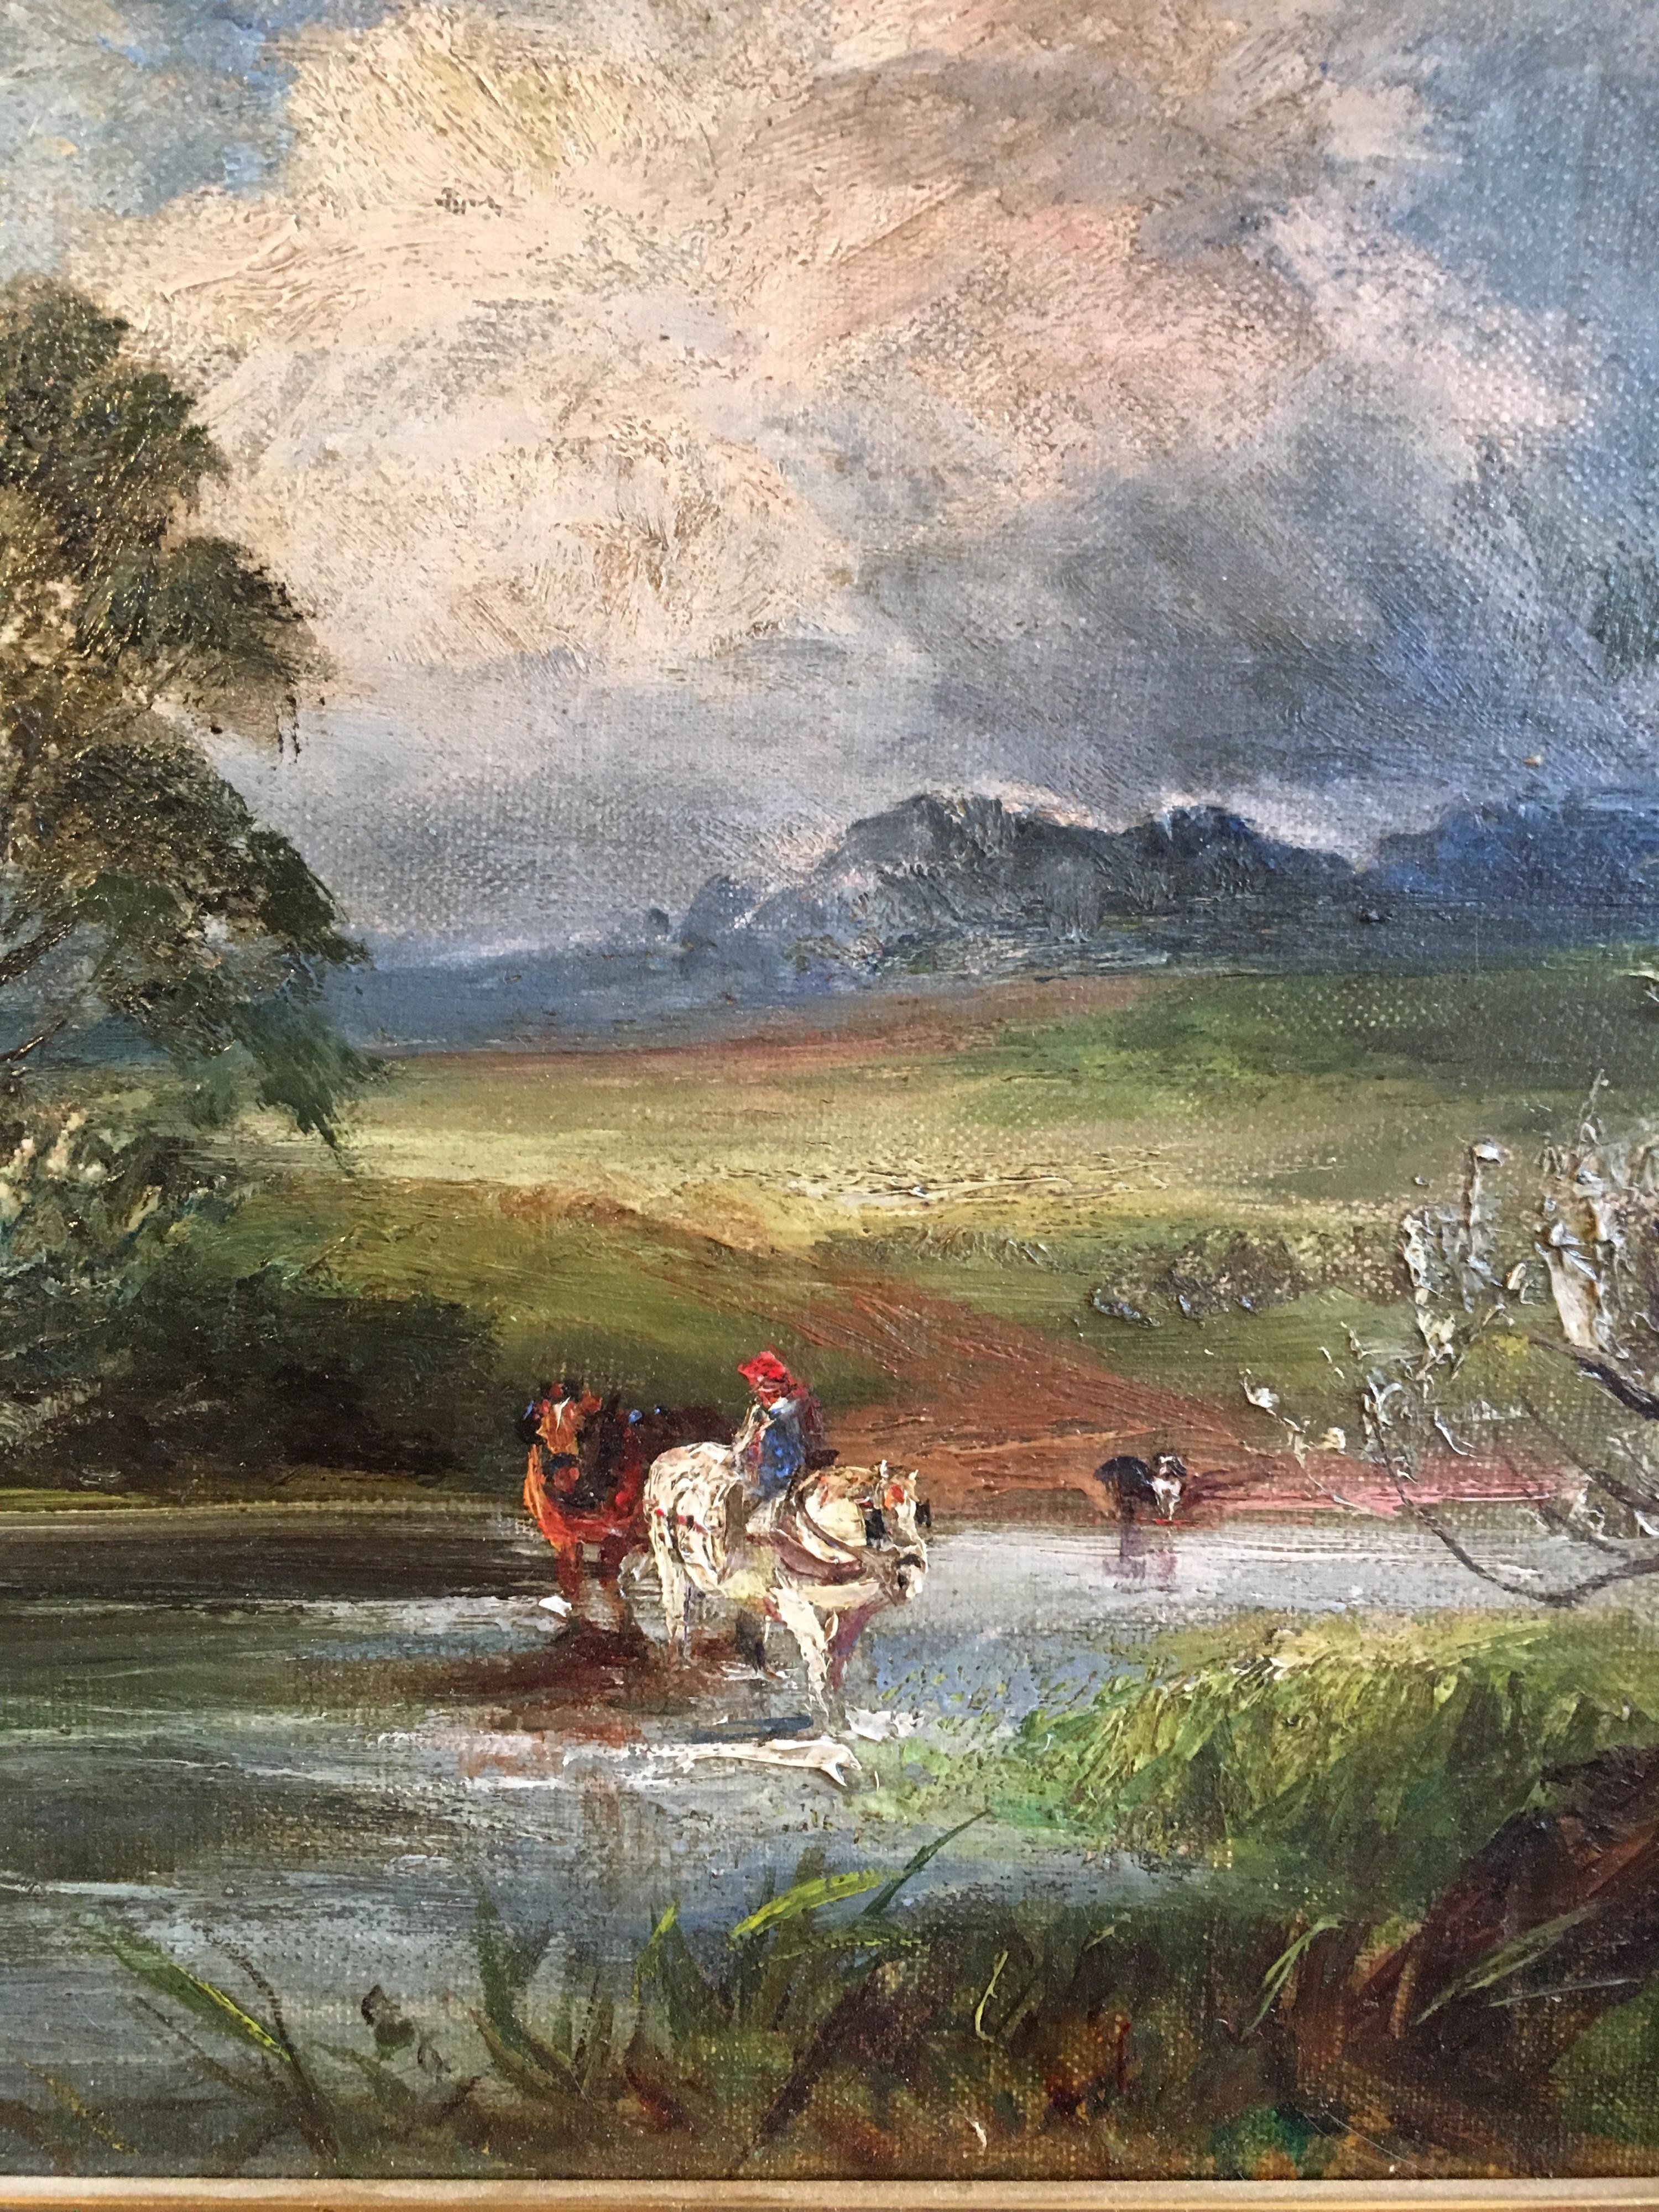 Crossing the River
by W. E. Pettingale, British late 19th century
signed lower corner
Oil painting on canvas, framed
Framed size: 12 x 16 inches

Atmospheric Victorian landscape oil painting of figures on horse back crossing a deep stream, with dogs